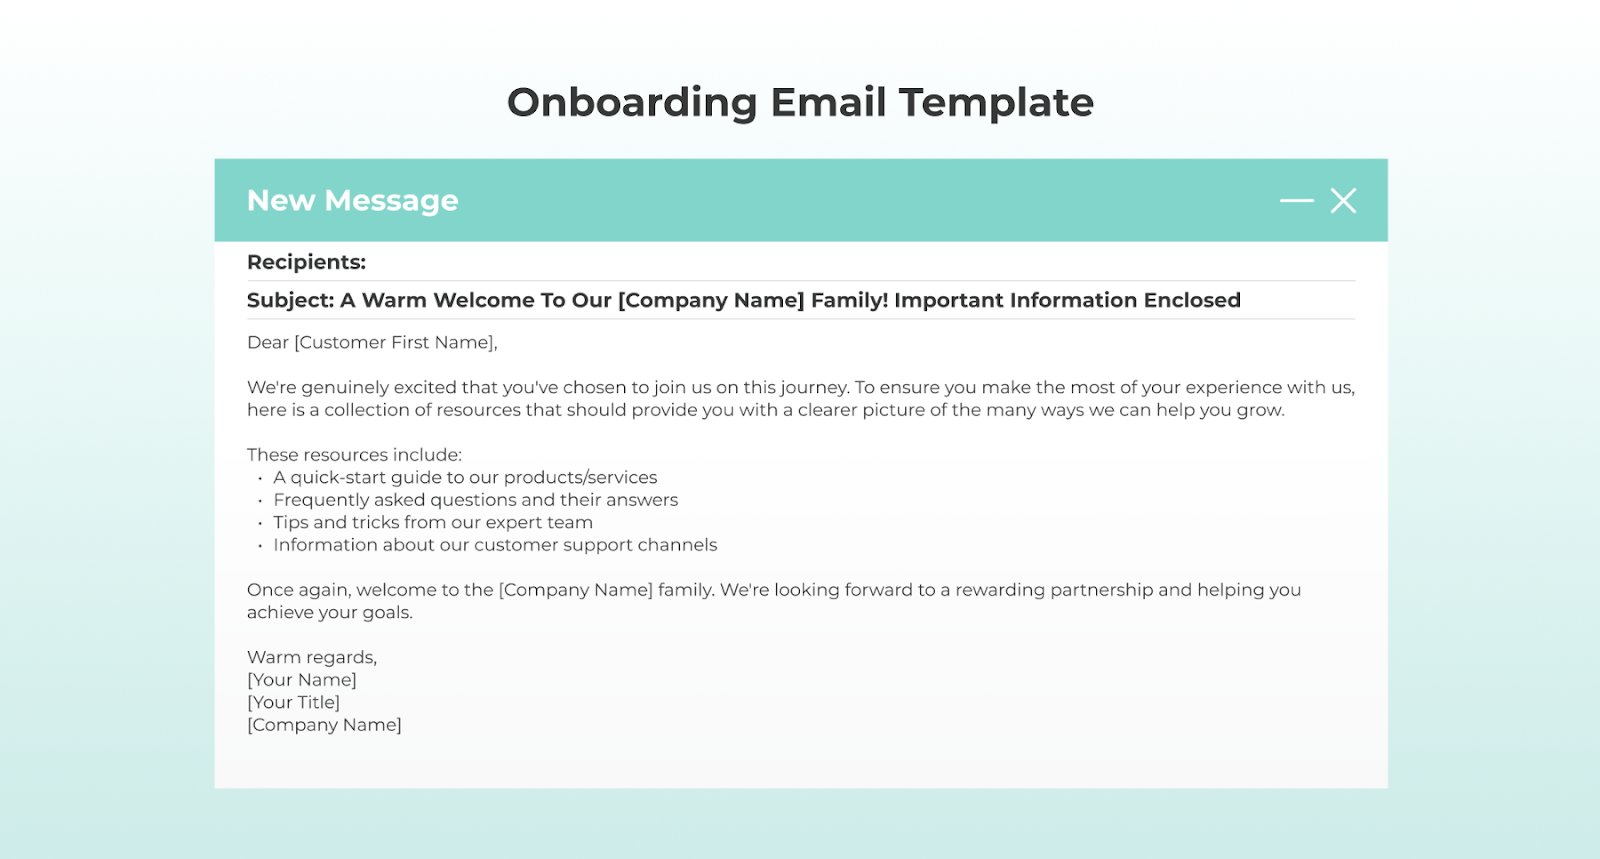 Onboarding emails